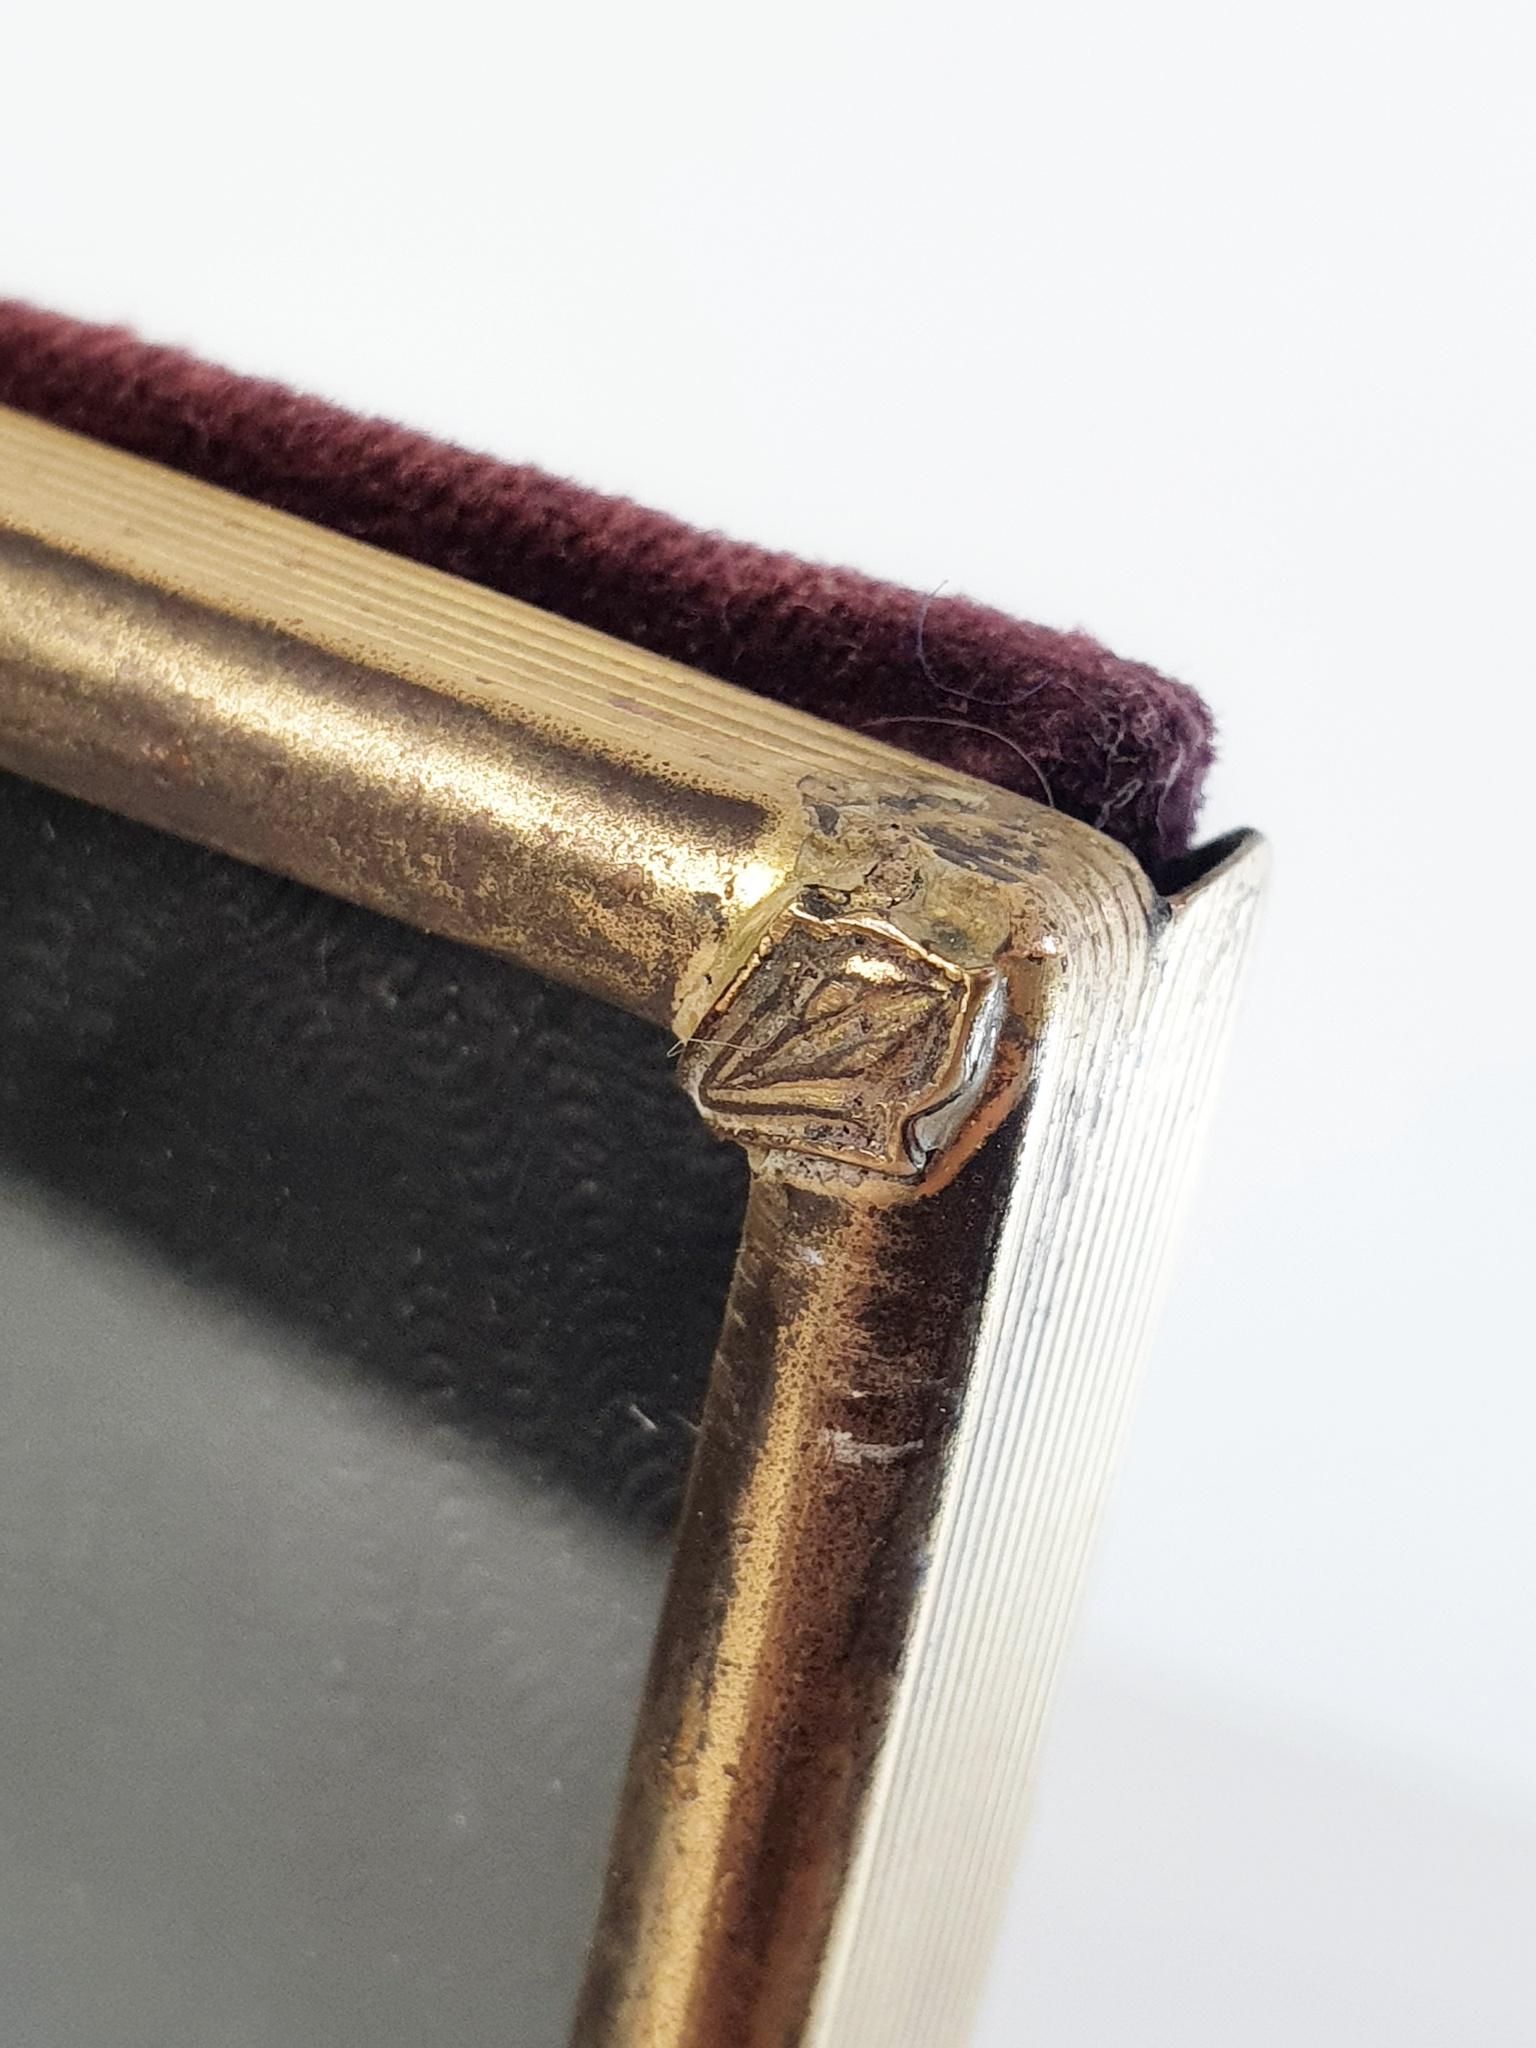 An antique decorative photo/picture frame in brass in Italian Liberty Style from the early 1900's. In good condition with natural patina. This frame has a double hinge system which means you can open and fold the frame 180 degrees which means you